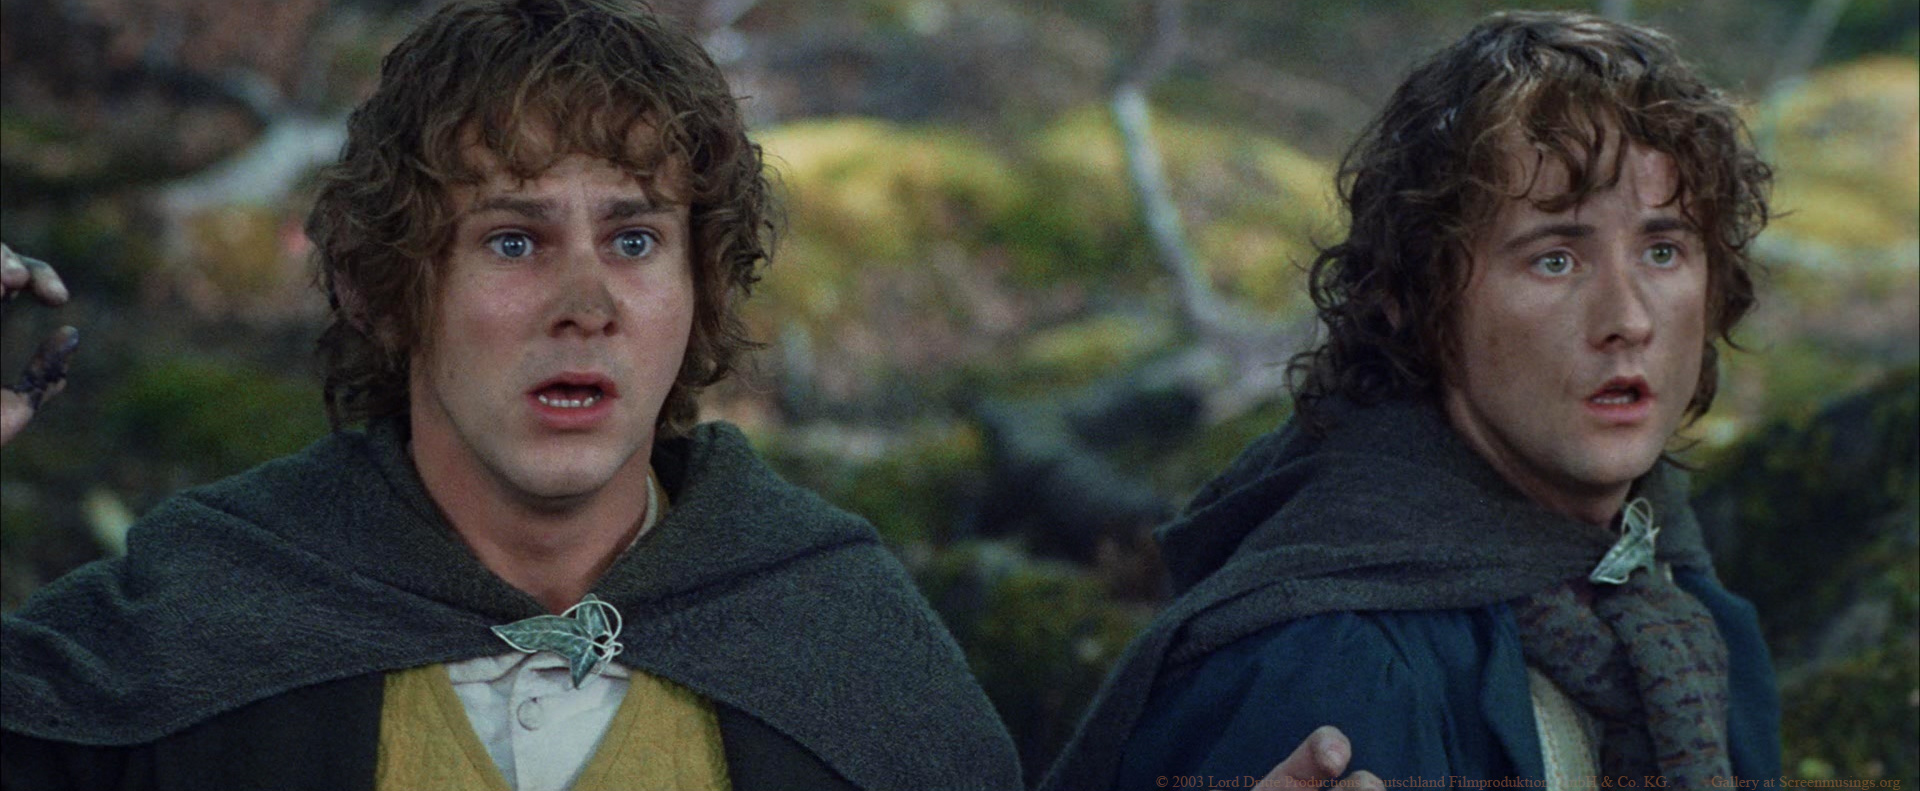 Billy Boyd, Dominic Monaghan in The Lord of the Rings: The Return of the King